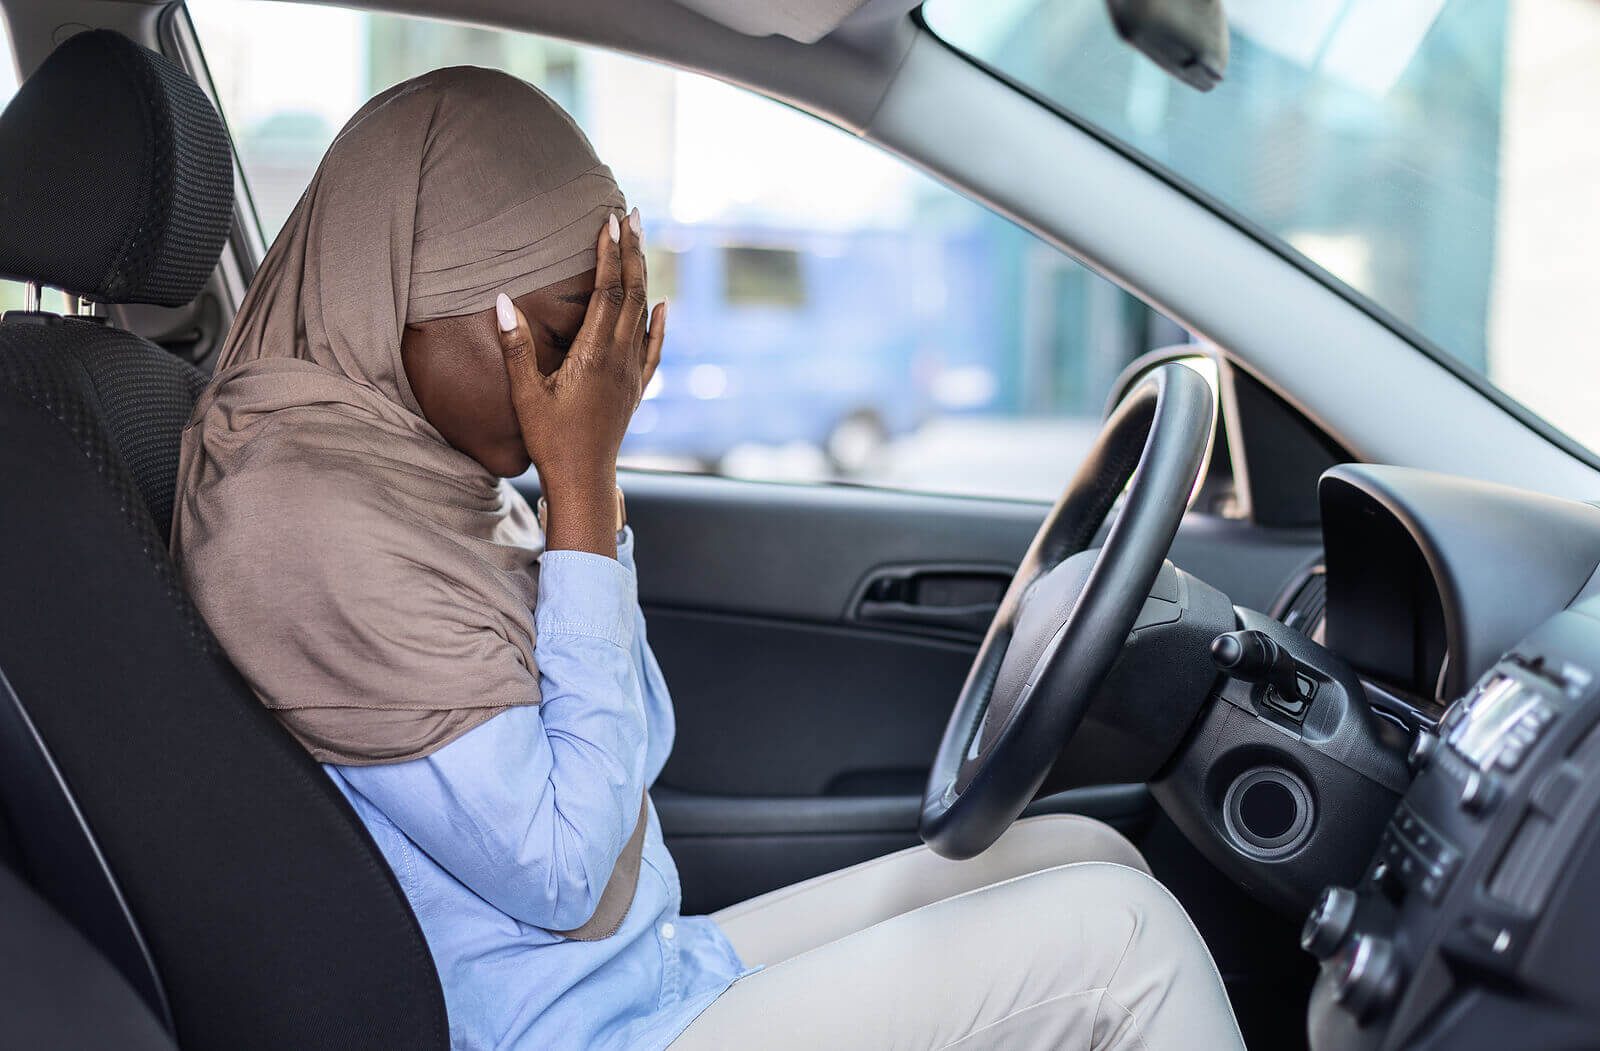 Image of a woman covering her face while sitting in the car. Have you considered anxiety treatment in Westfield, NJ? A therapist can help you address your fear of driving in anxiety therapy. If have experienced signs of anxiety then it is time to start anxiety counseling. Reach out now to start in New Jersey